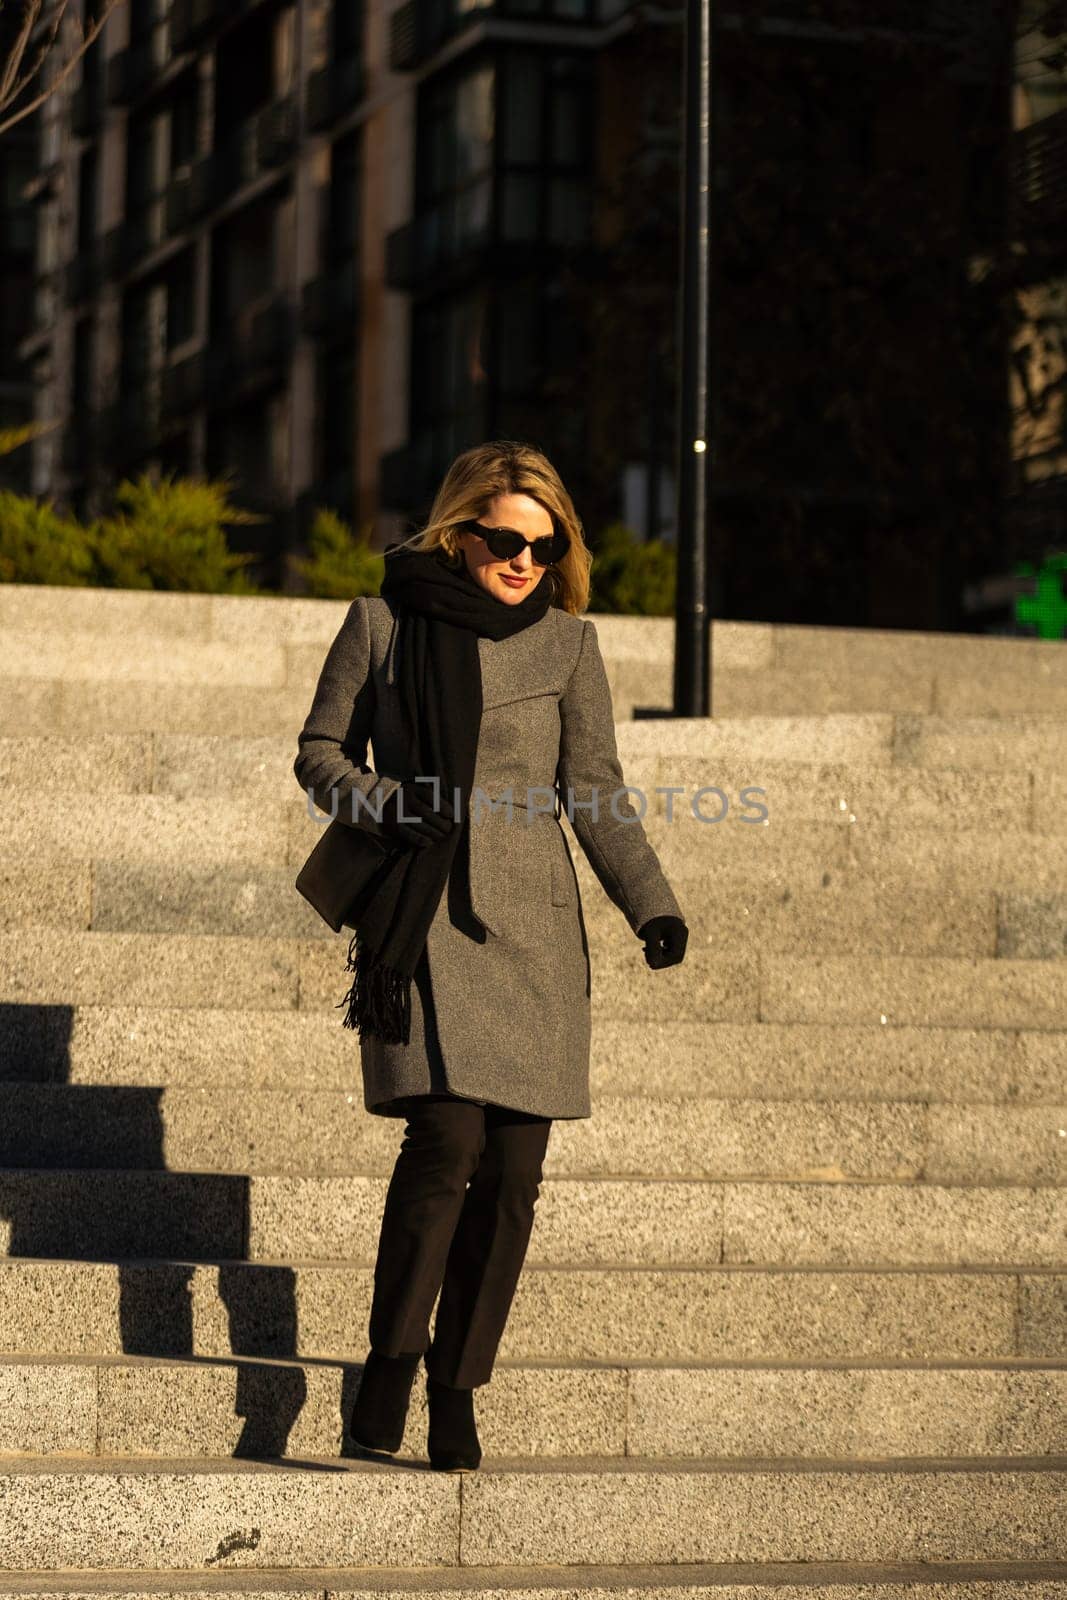 The young lady in black stylish coat with black scarf walking the sun rays at sunset on the background the cold autumn day in the city. High quality photo